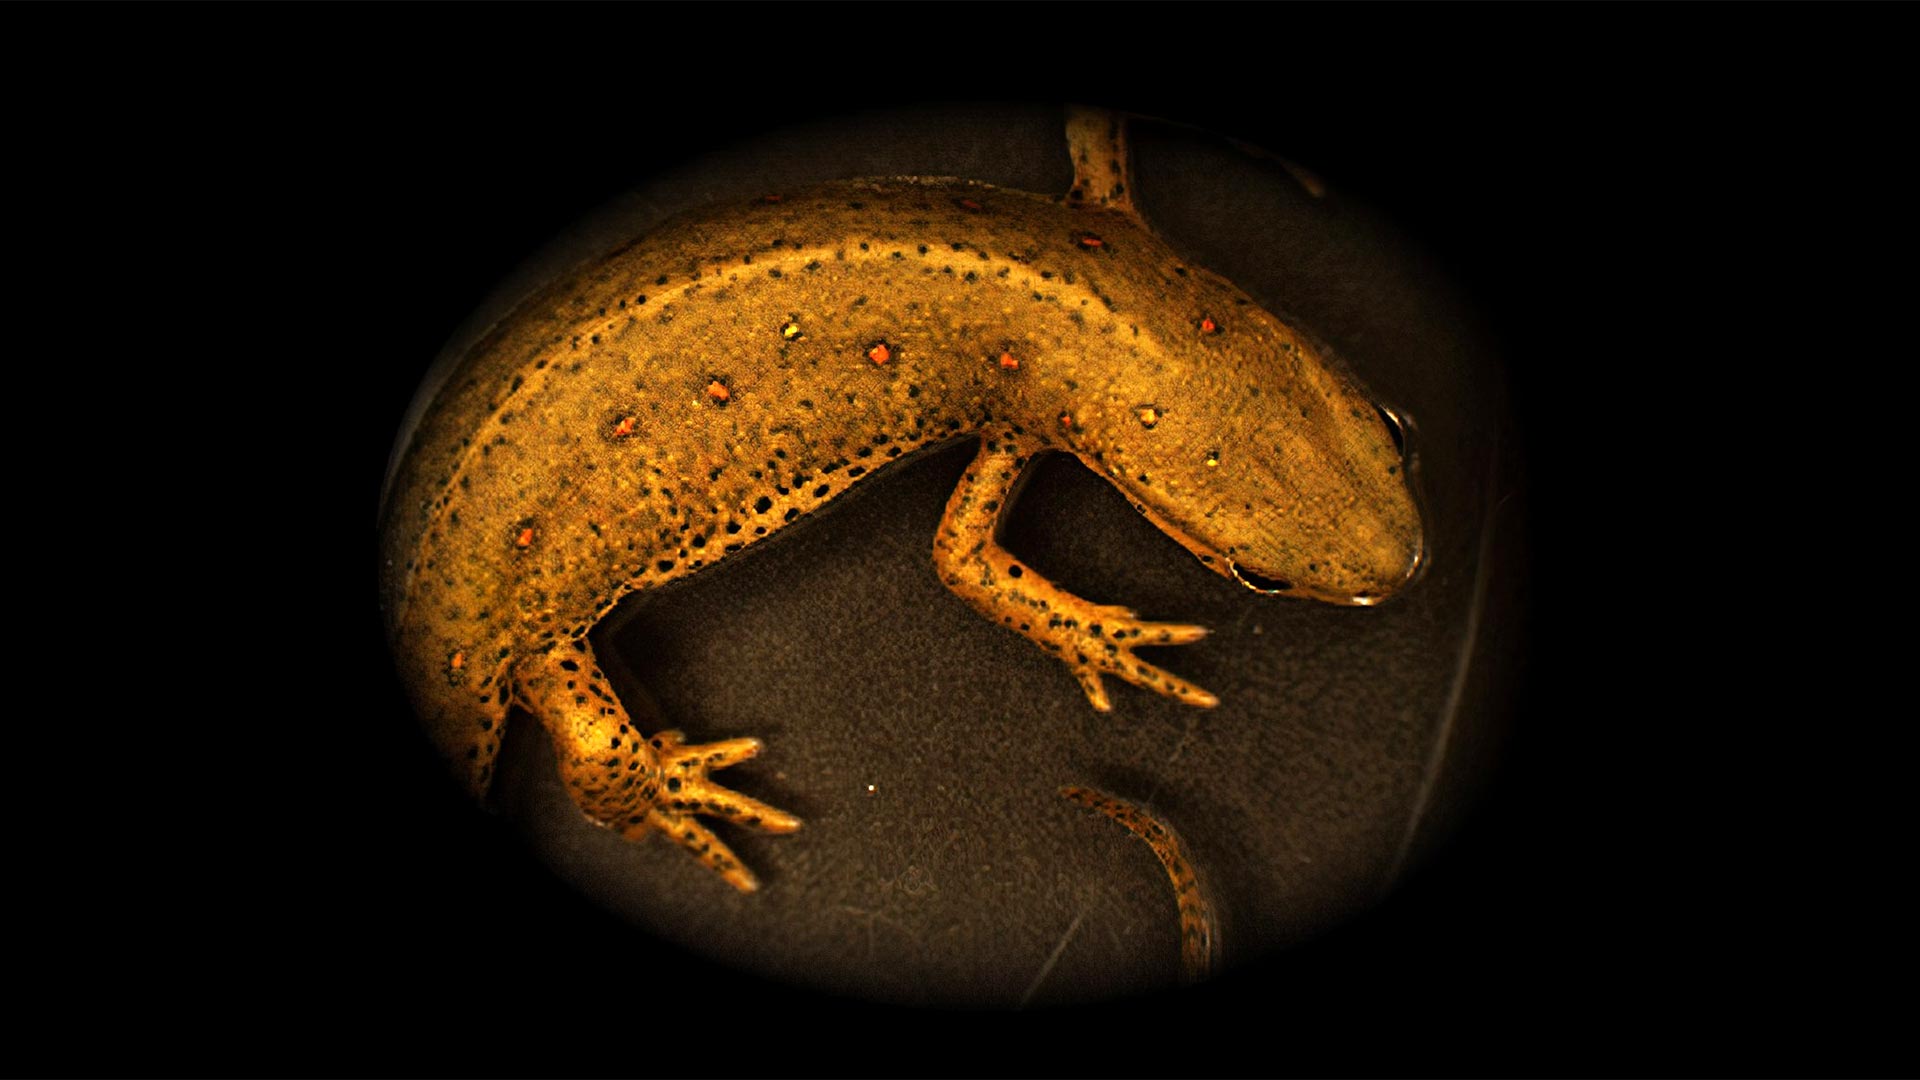 https://scitechdaily.com/images/Salamander-Red-Spotted-Newt-Notophthalmus-viridescens.jpg